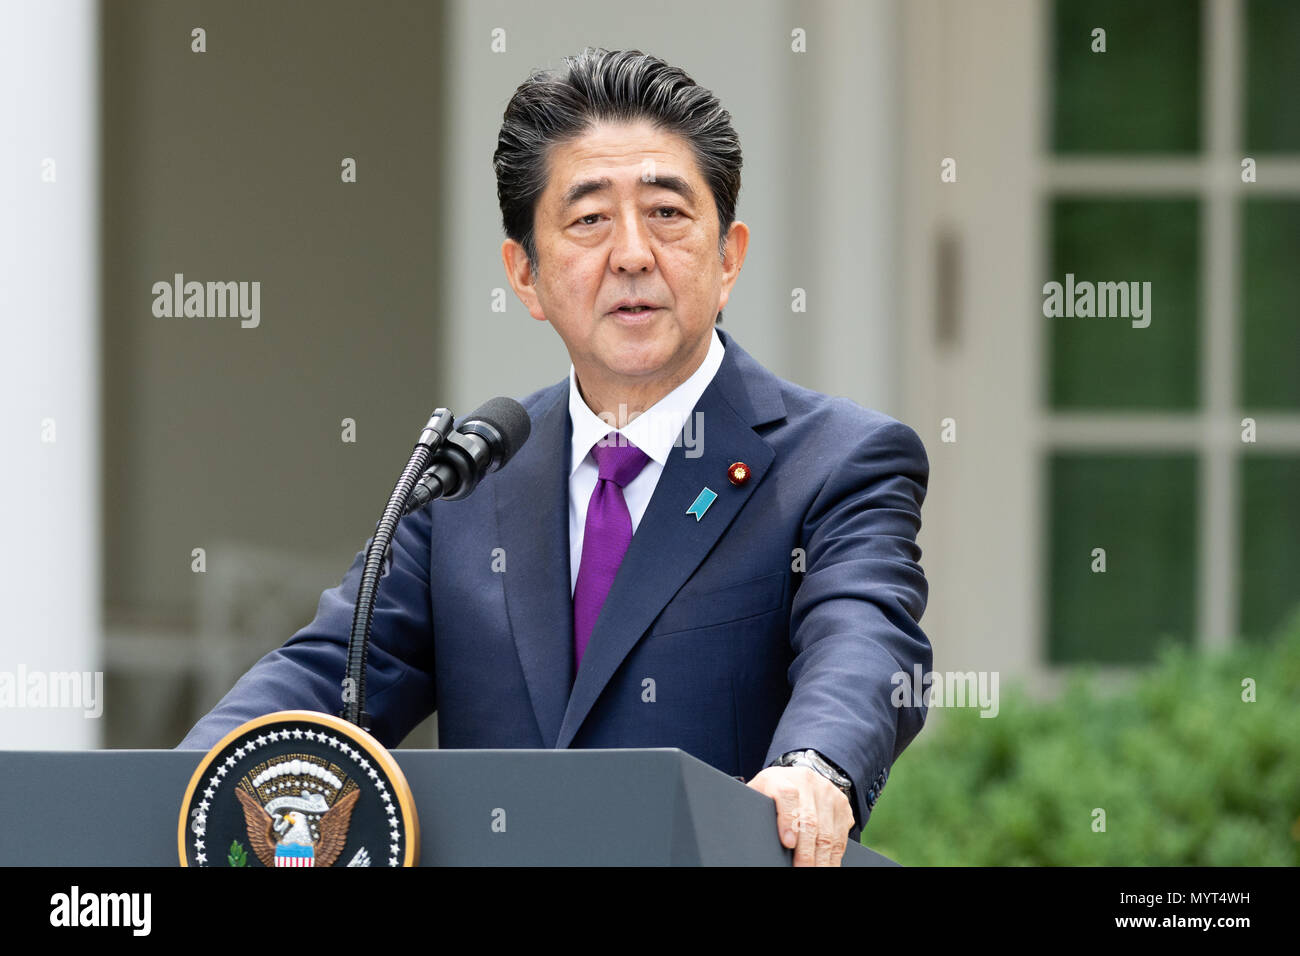 Shinzo Abe, the Prime Minister of Japan, in the Rose Garden at the White House. US President Donald Trump and Japan's Prime Minister Shinzo Abe take part in a joint press conference in the Rose Garden of the White House. Stock Photo